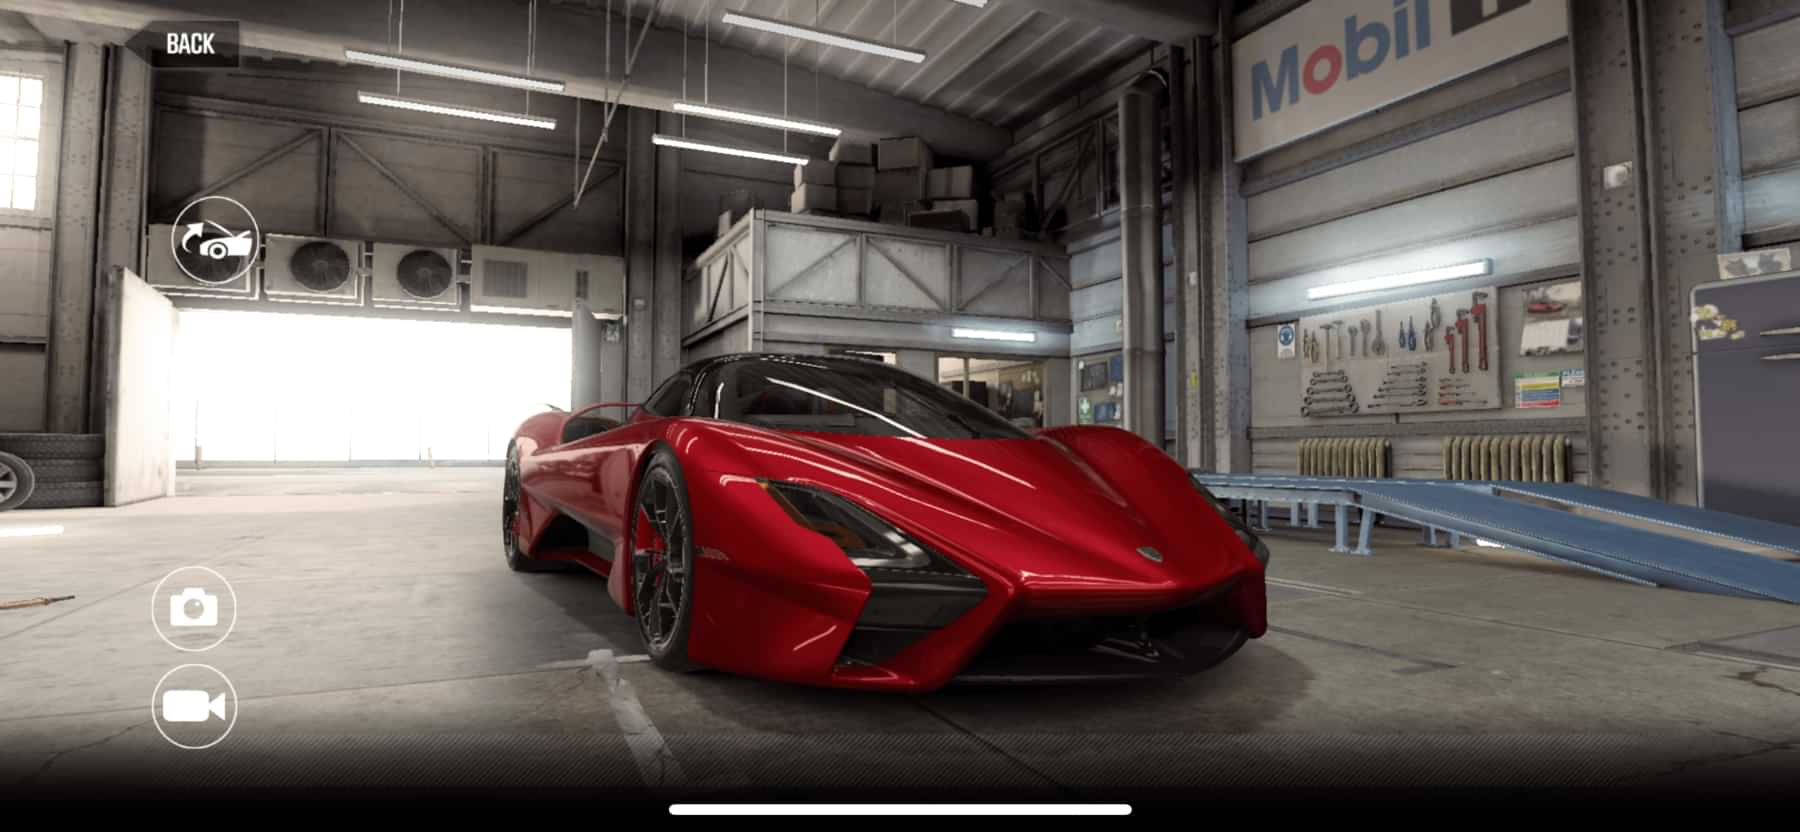 Why does CSR2 keep crashing – Device Issues